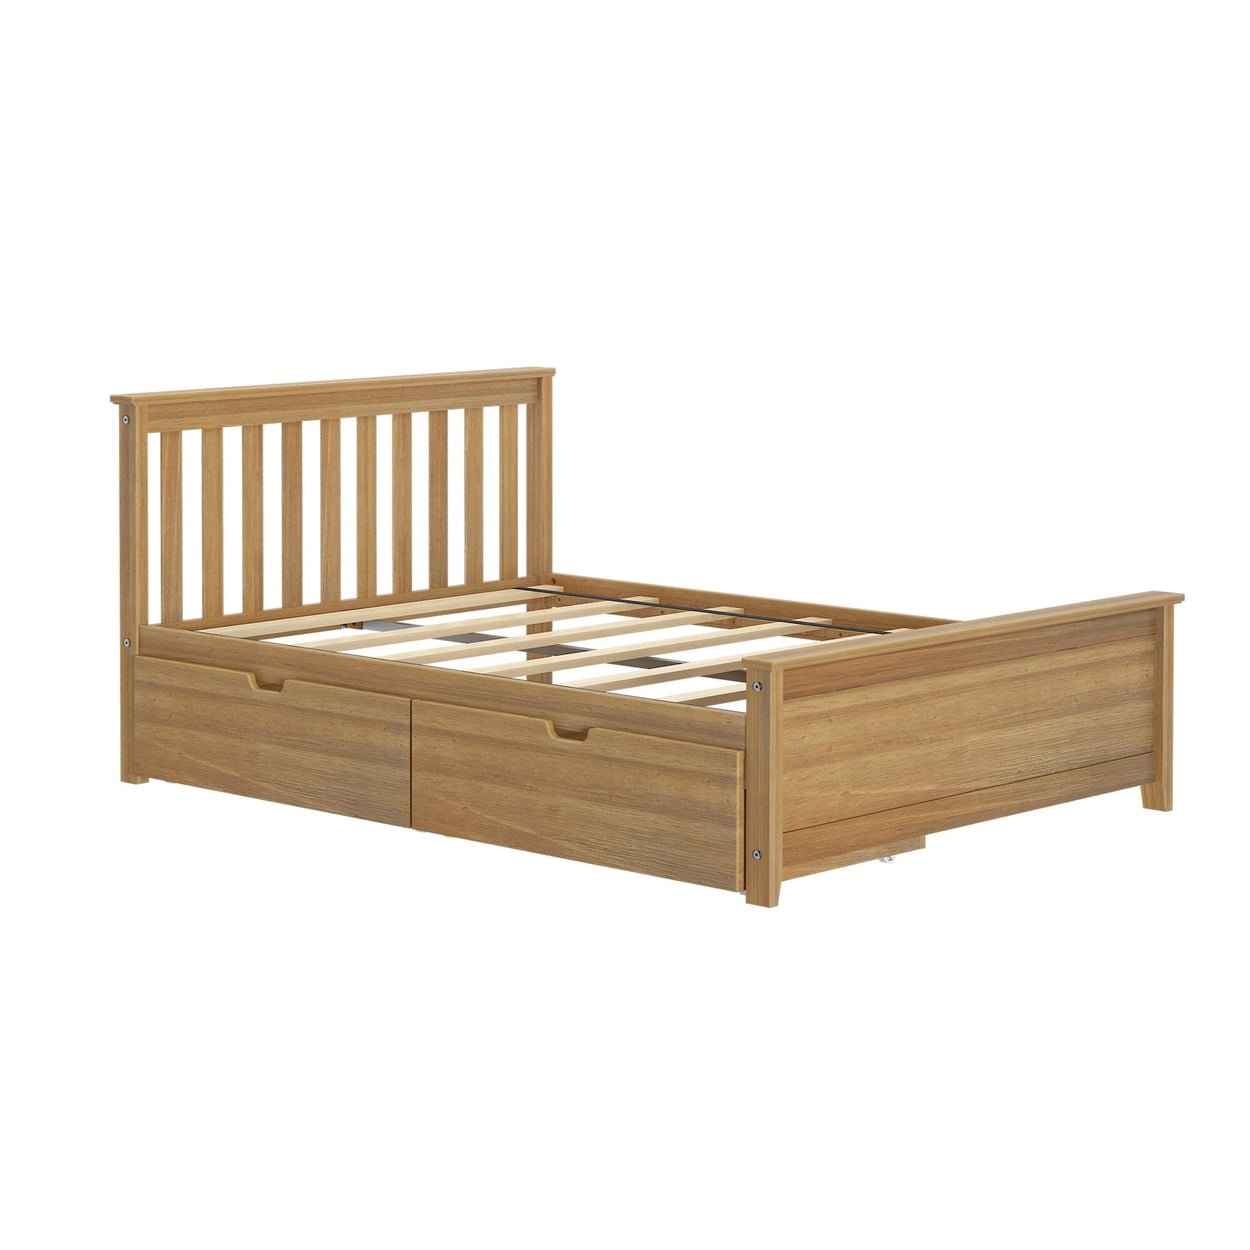 187211-007 : Kids Beds Full-Size Platform with Under Bed Storage Drawers, Pecan